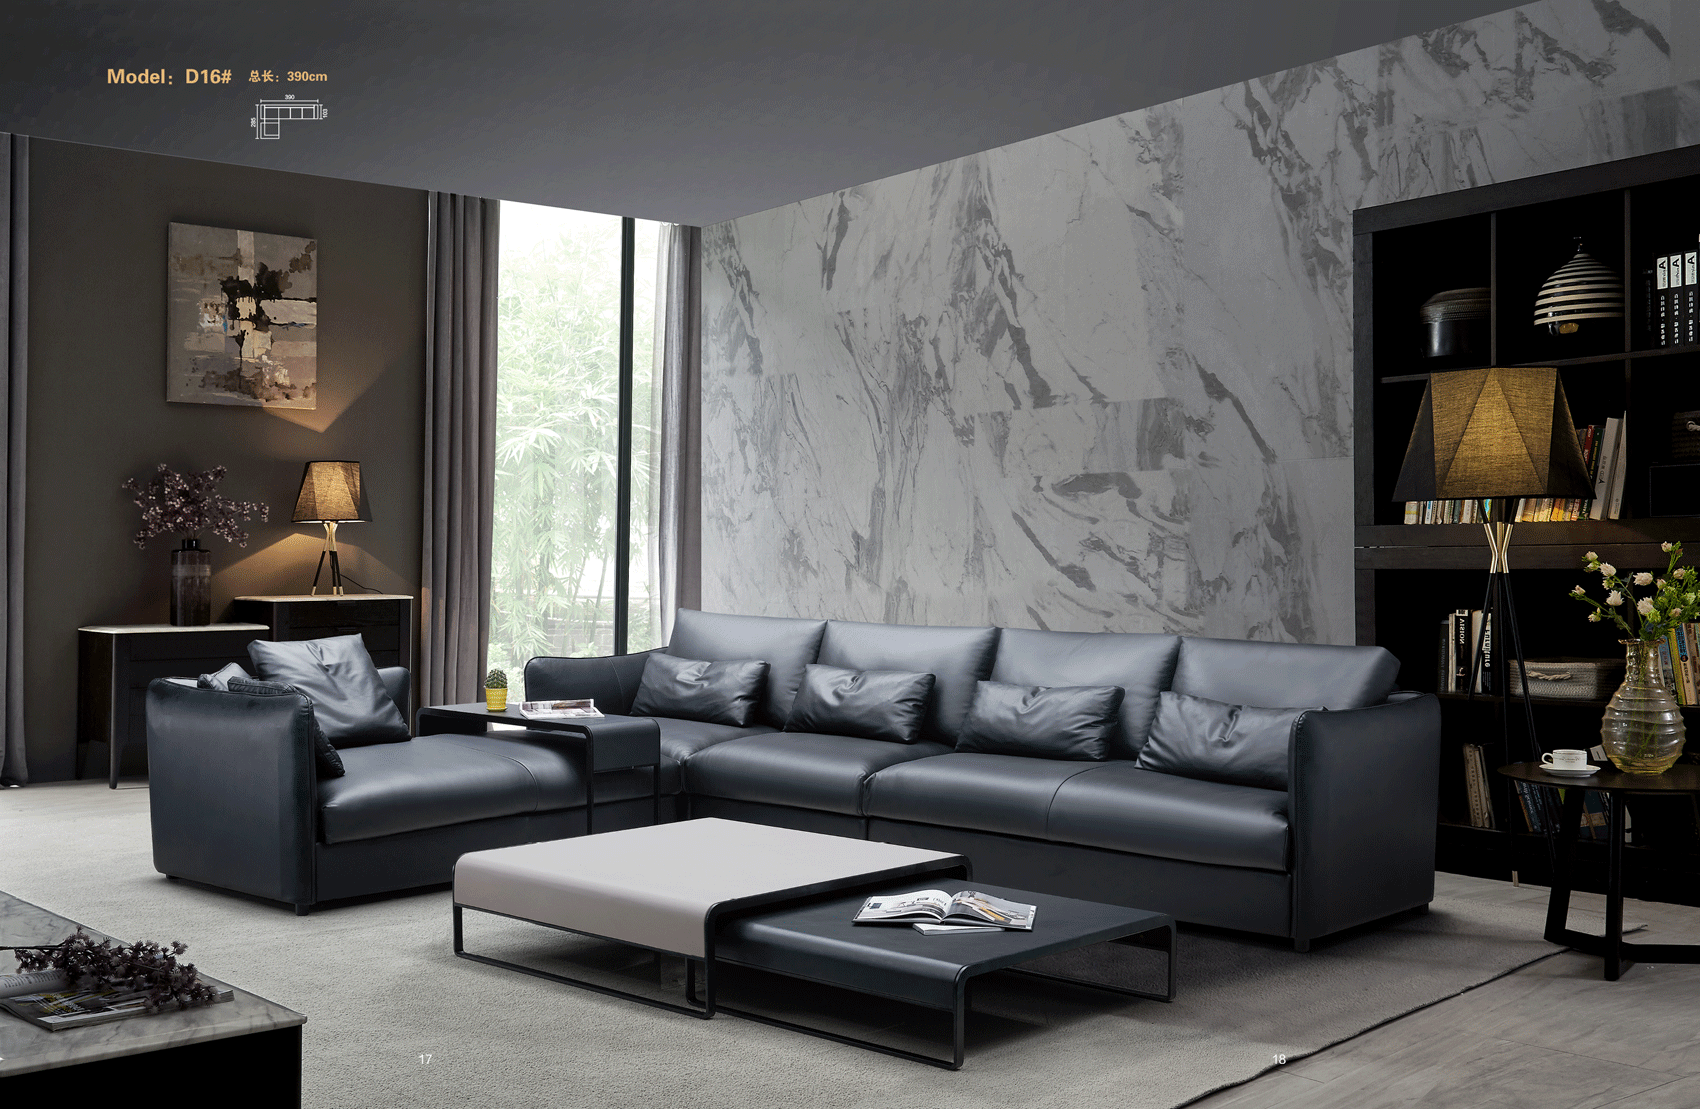 Brands WCH Modern Living Special Order D16 Sectional